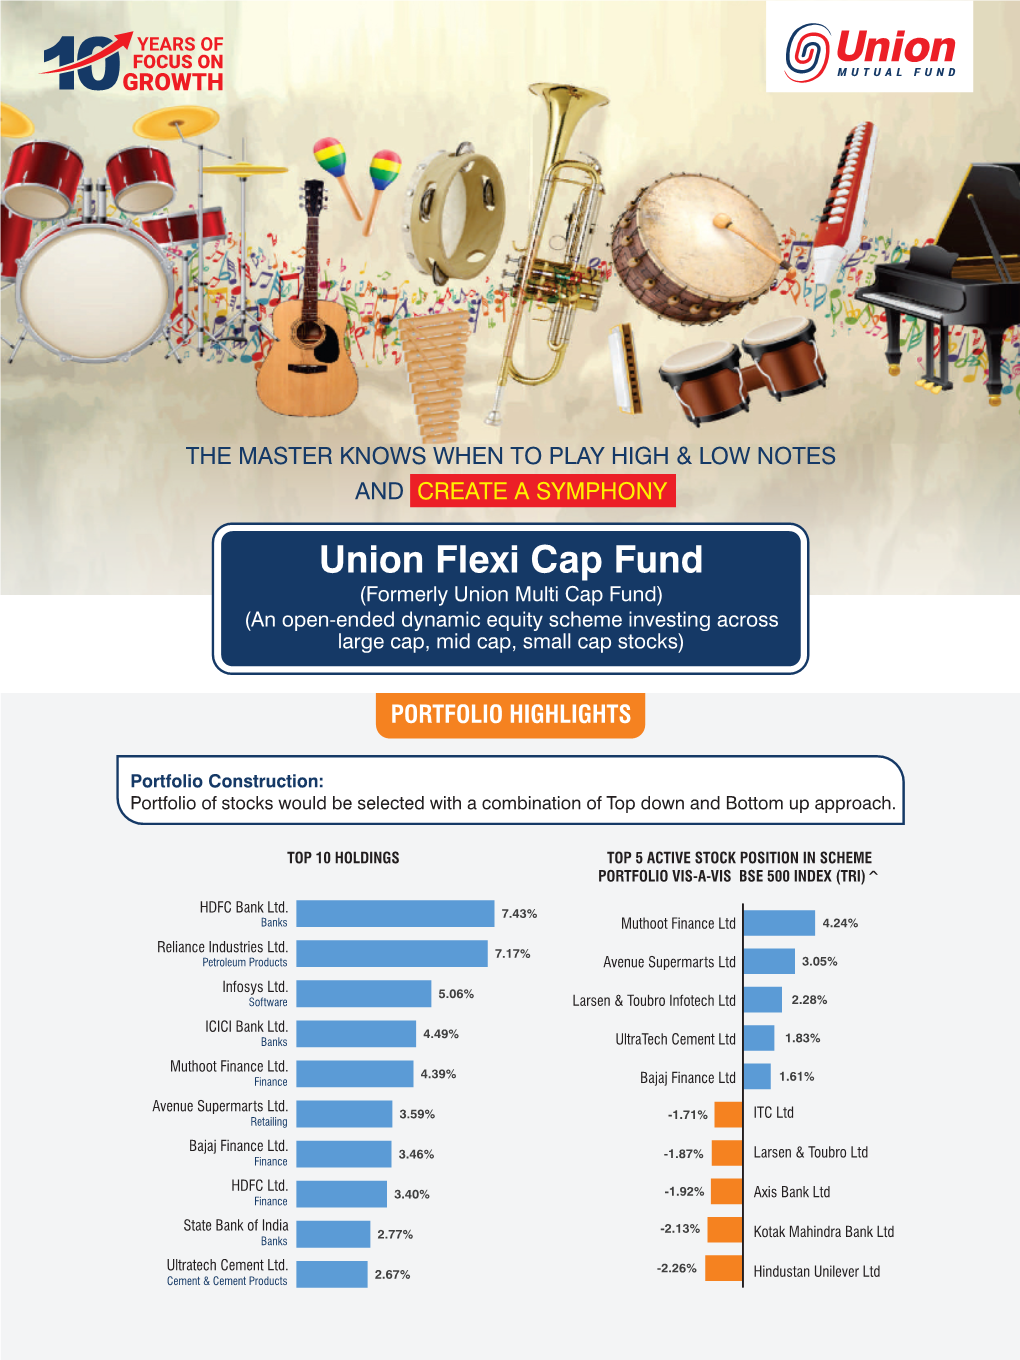 Union Flexi Cap Fund (Formerly Union Multi Cap Fund) (An Open-Ended Dynamic Equity Scheme Investing Across Large Cap, Mid Cap, Small Cap Stocks)